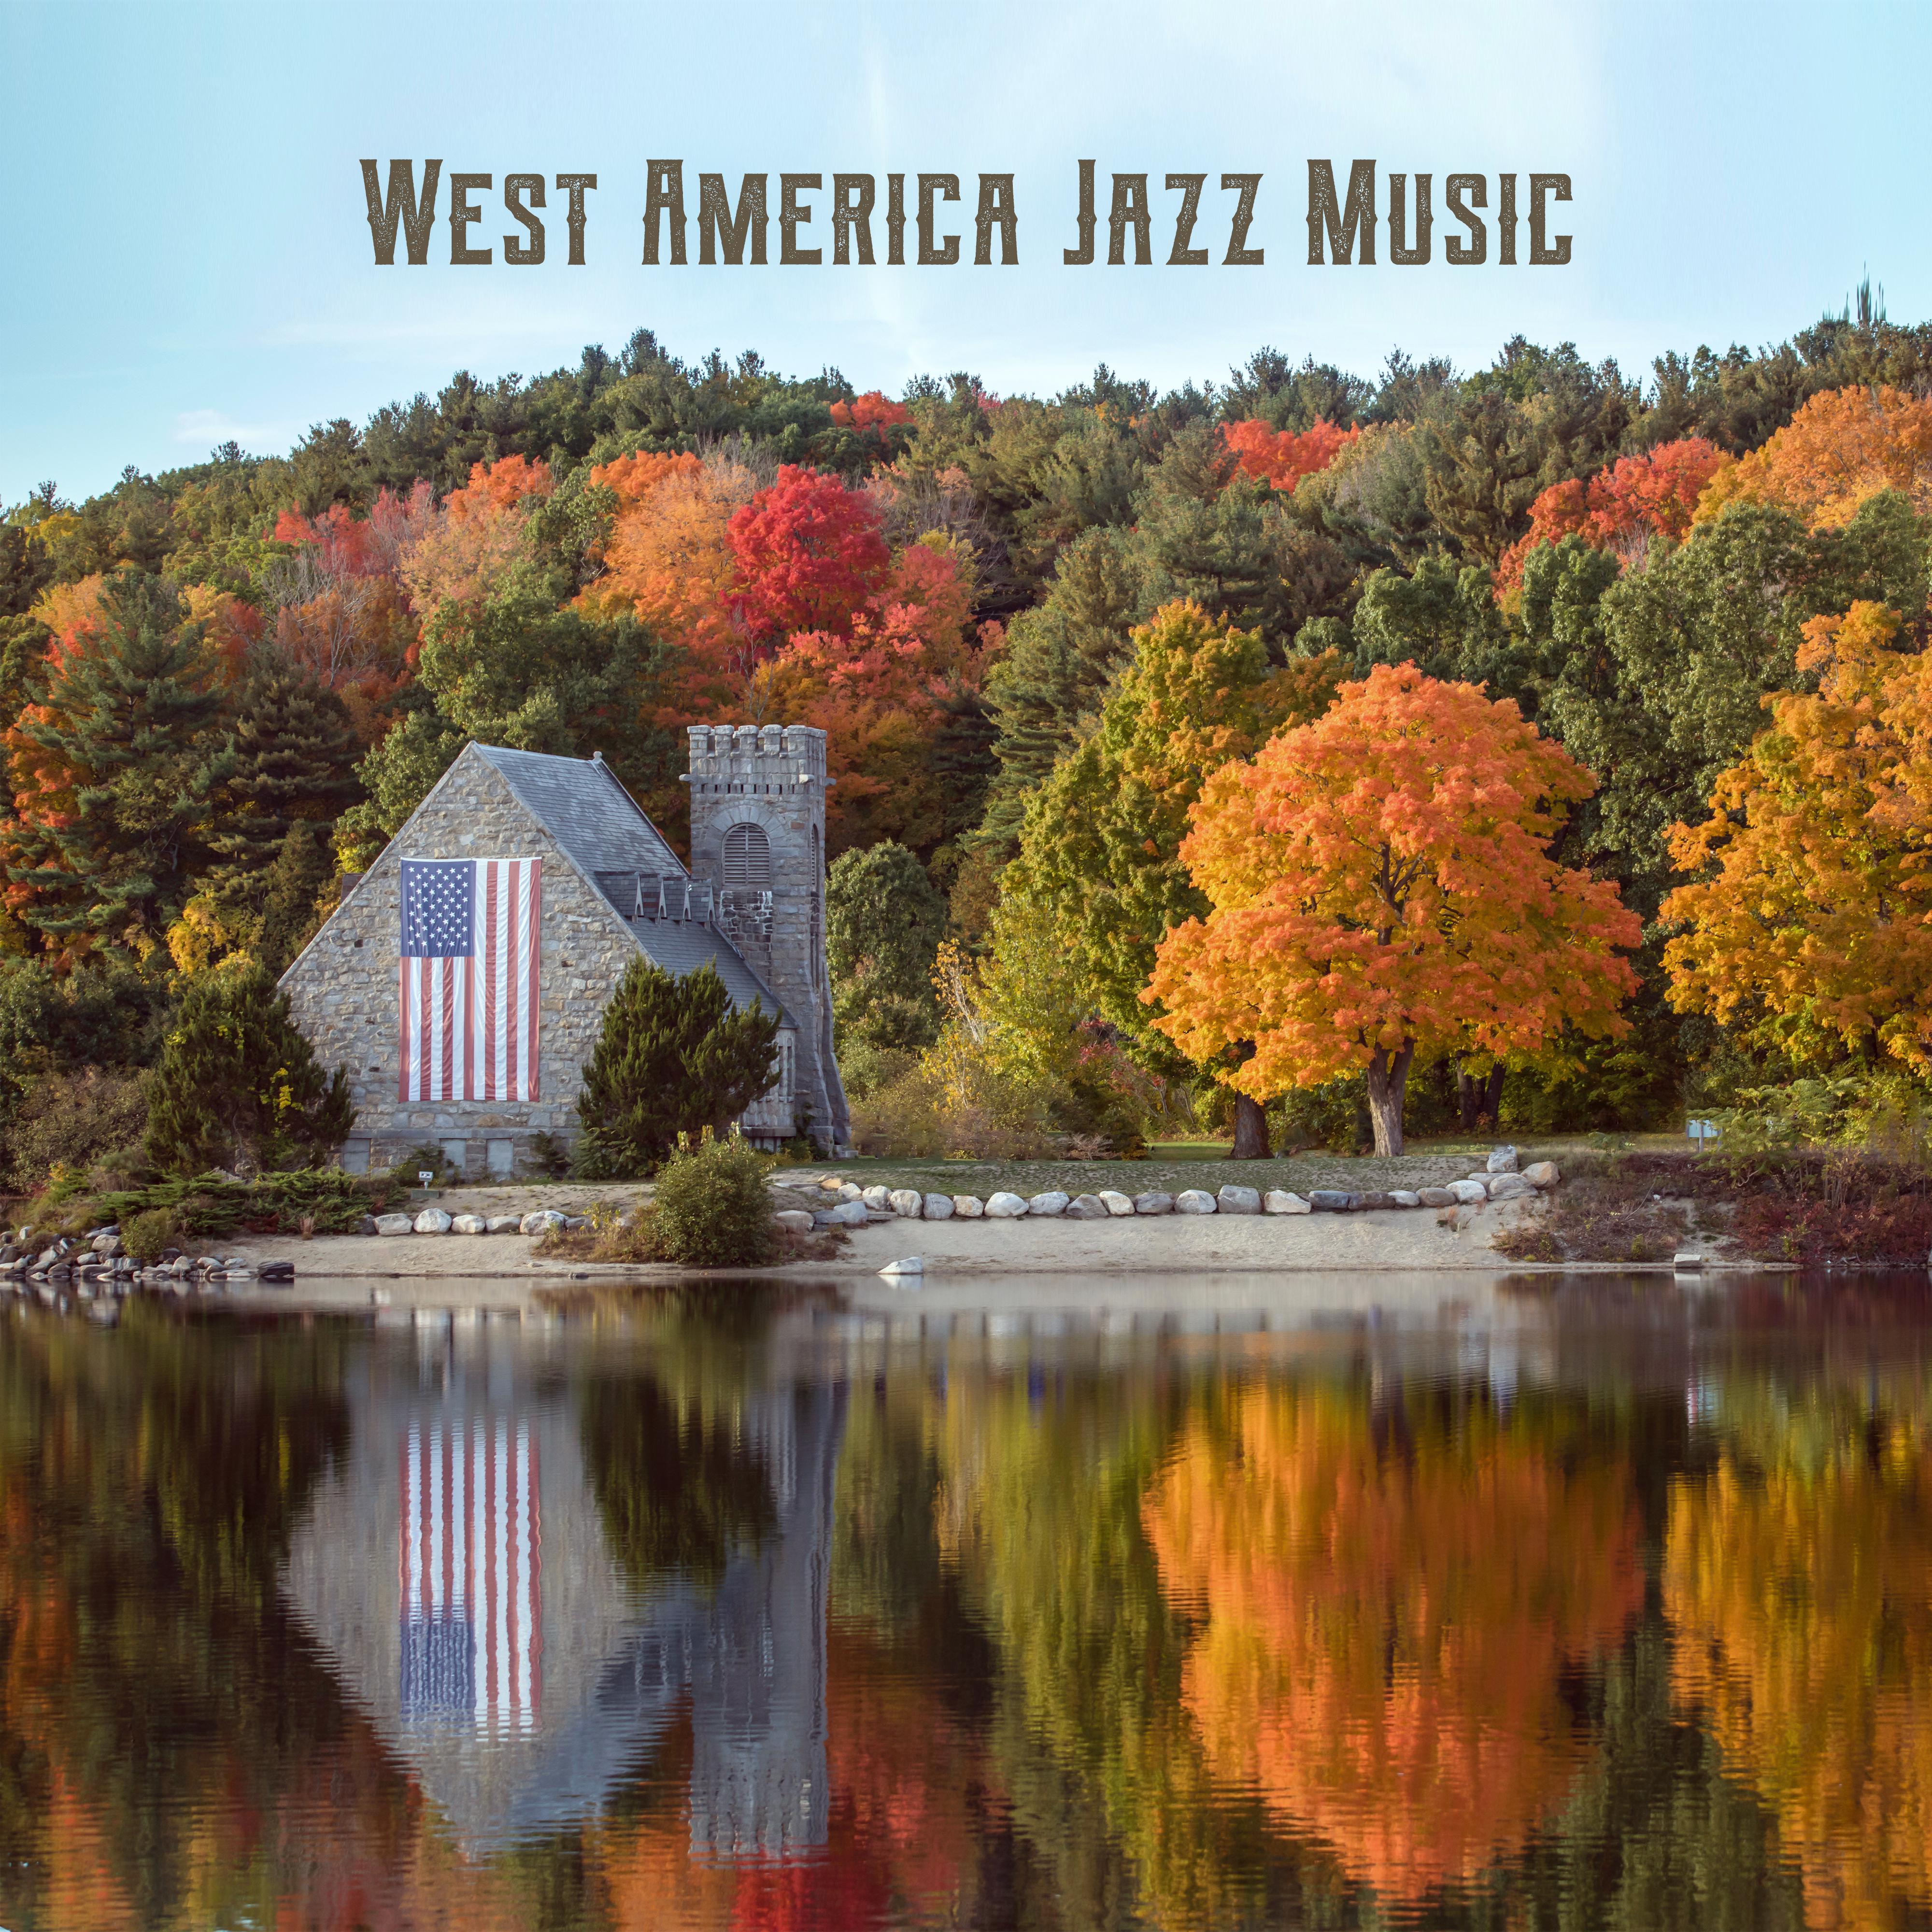 West America Jazz Music: 2019 Instrumental Smooth Jazz Music Compilation, Vintage Melodies with Sounds of Piano, Sax, Contrabass & Others